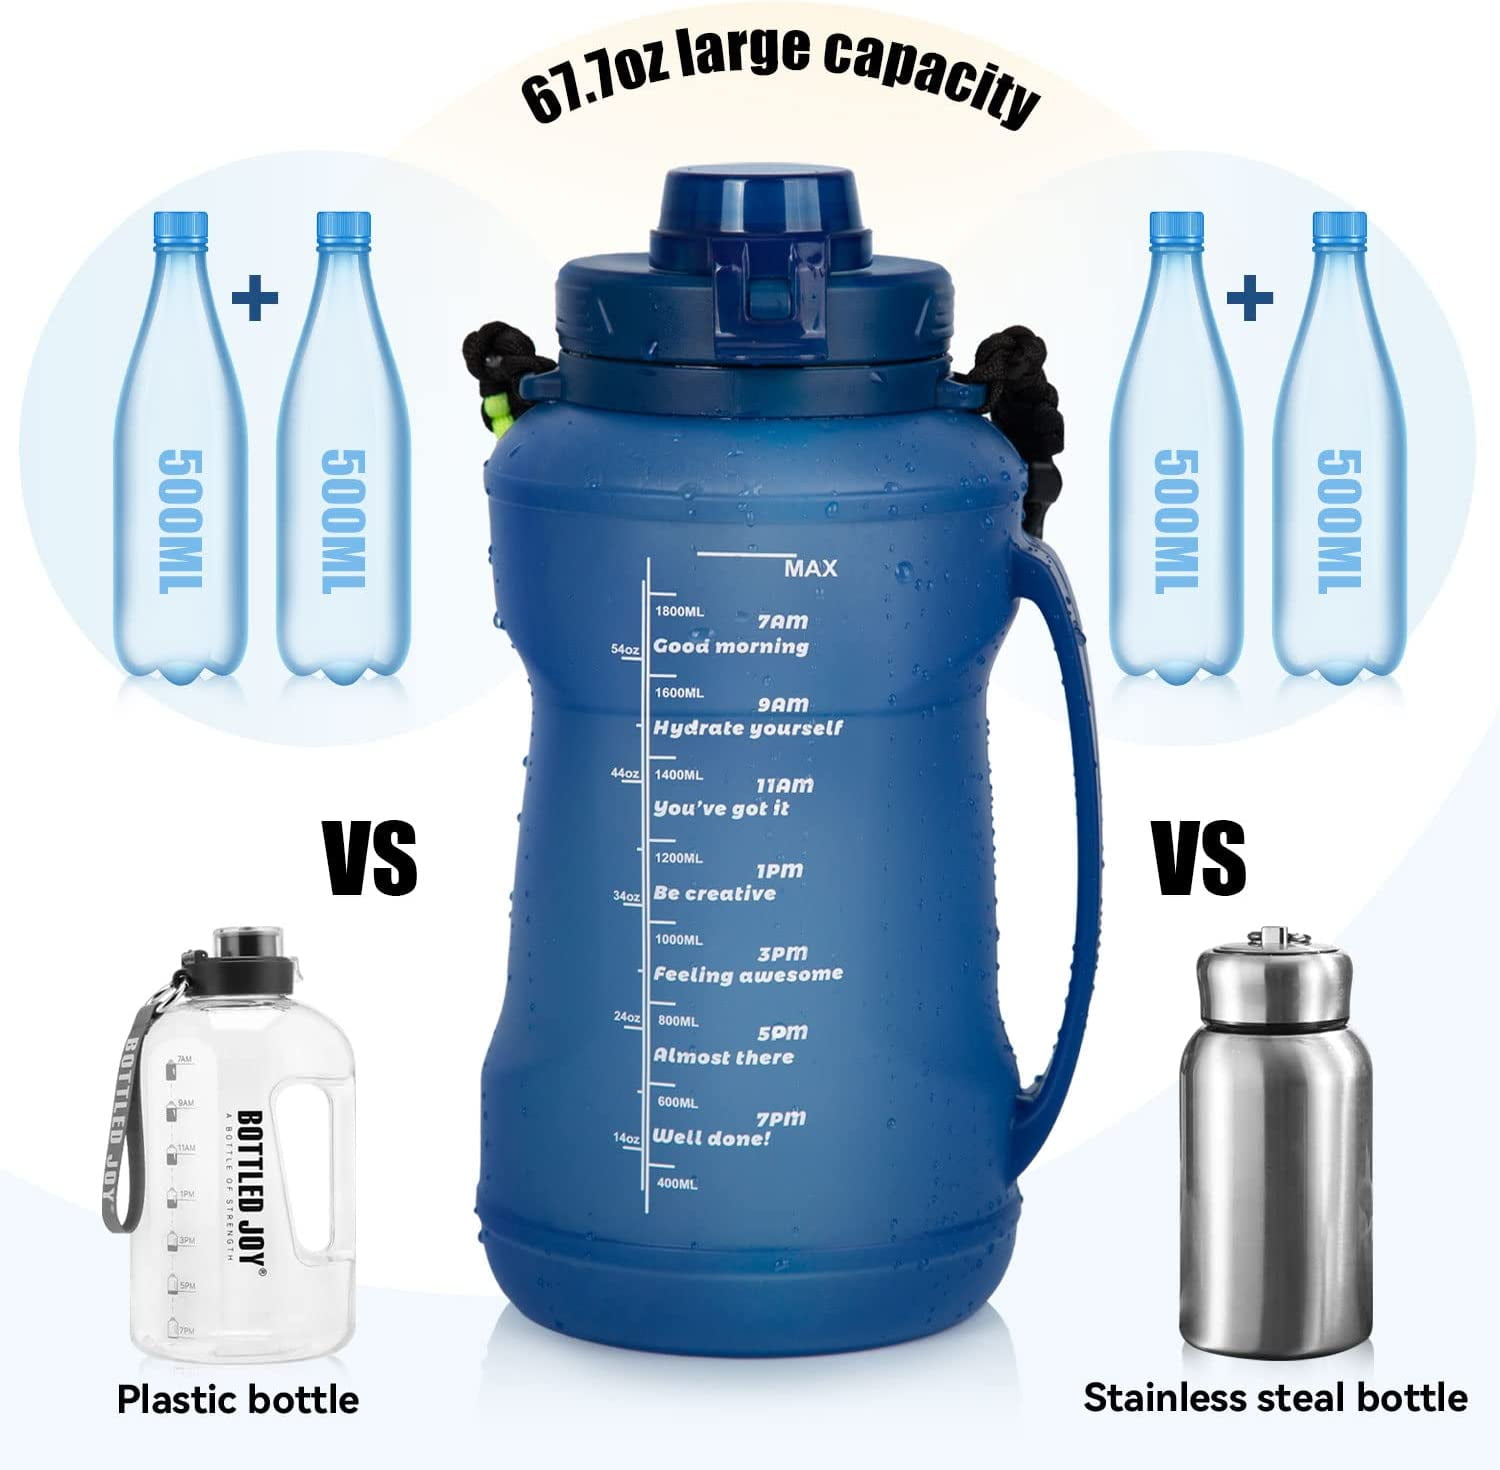 Leak Proof Reusable Lightweight Sports Water Bottle with Infus